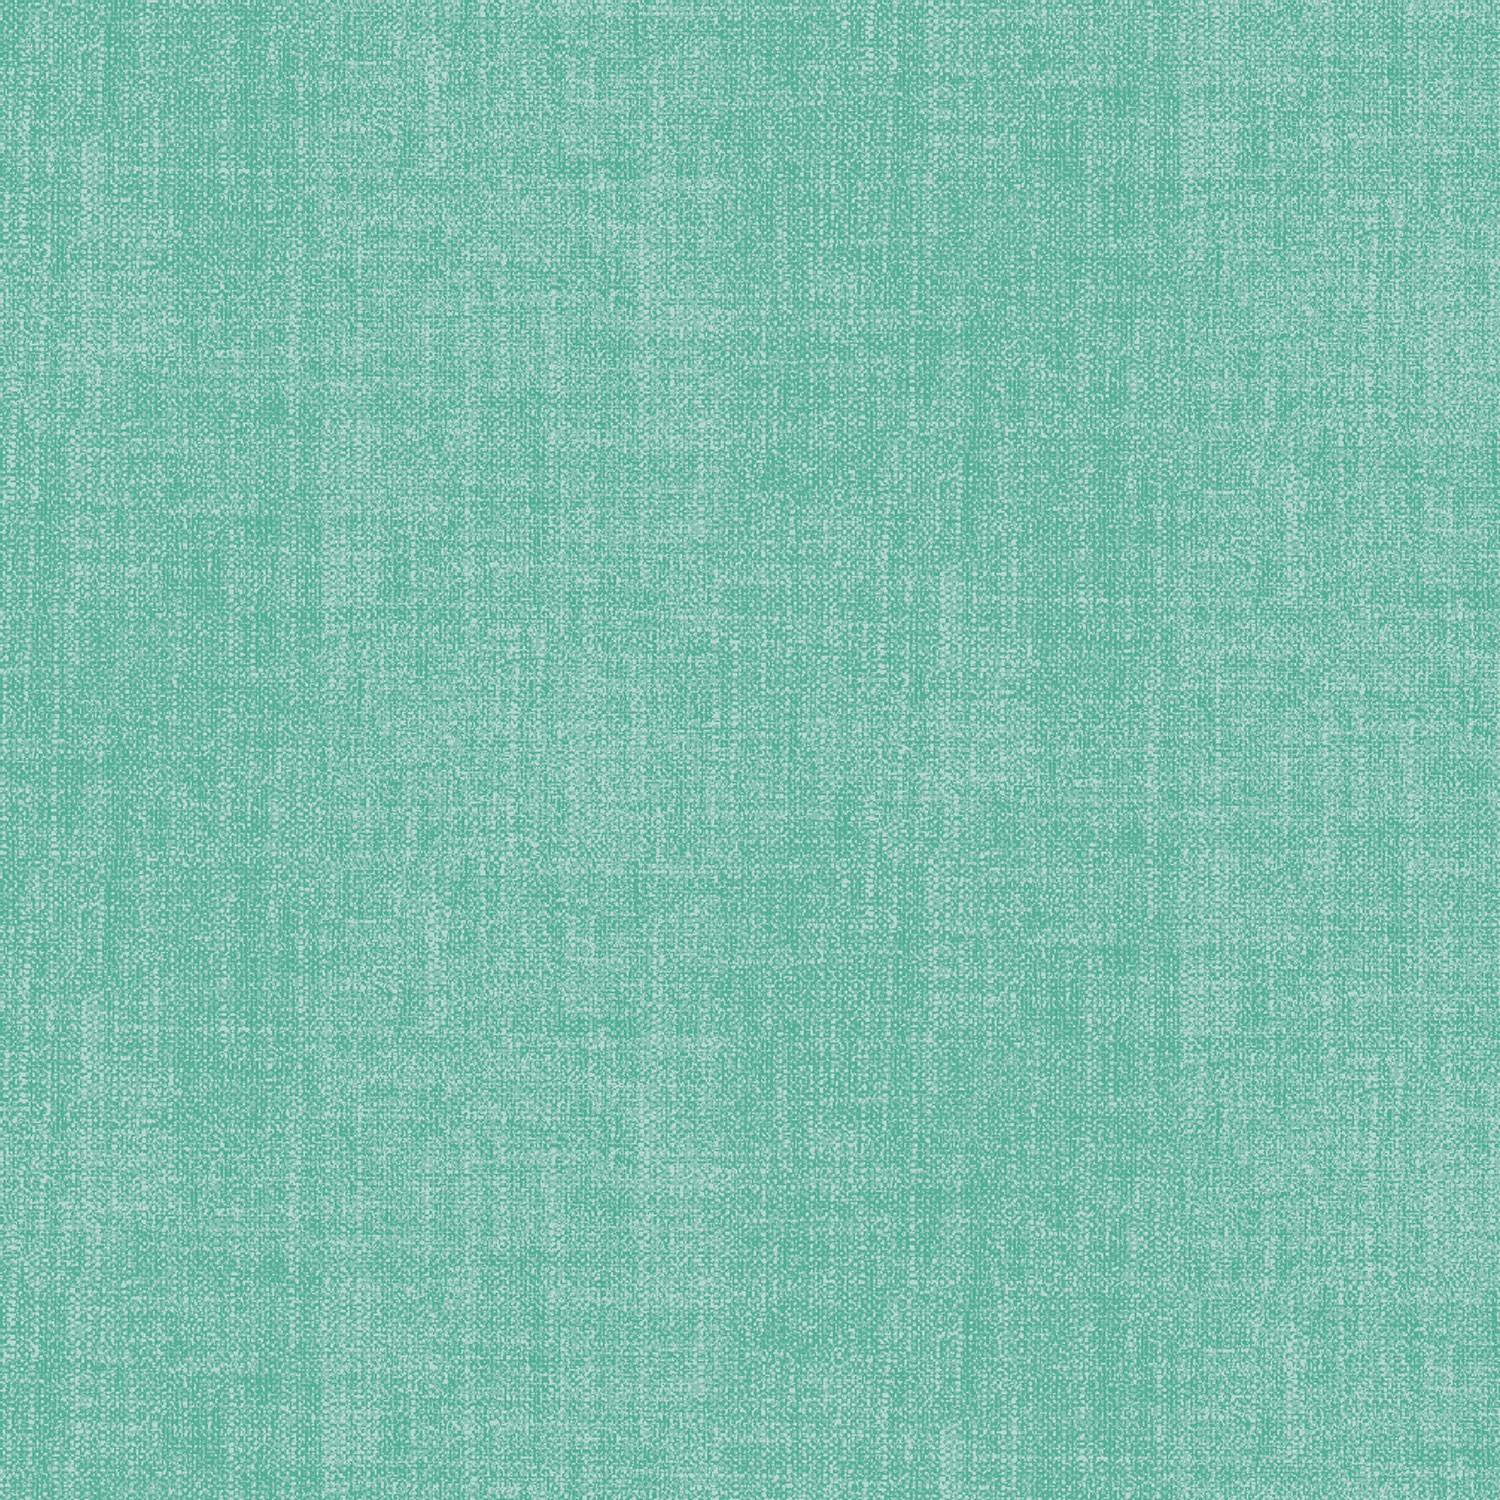 Chambray Tonals Lt Bluebell Quilting Cotton Fabric Yardage